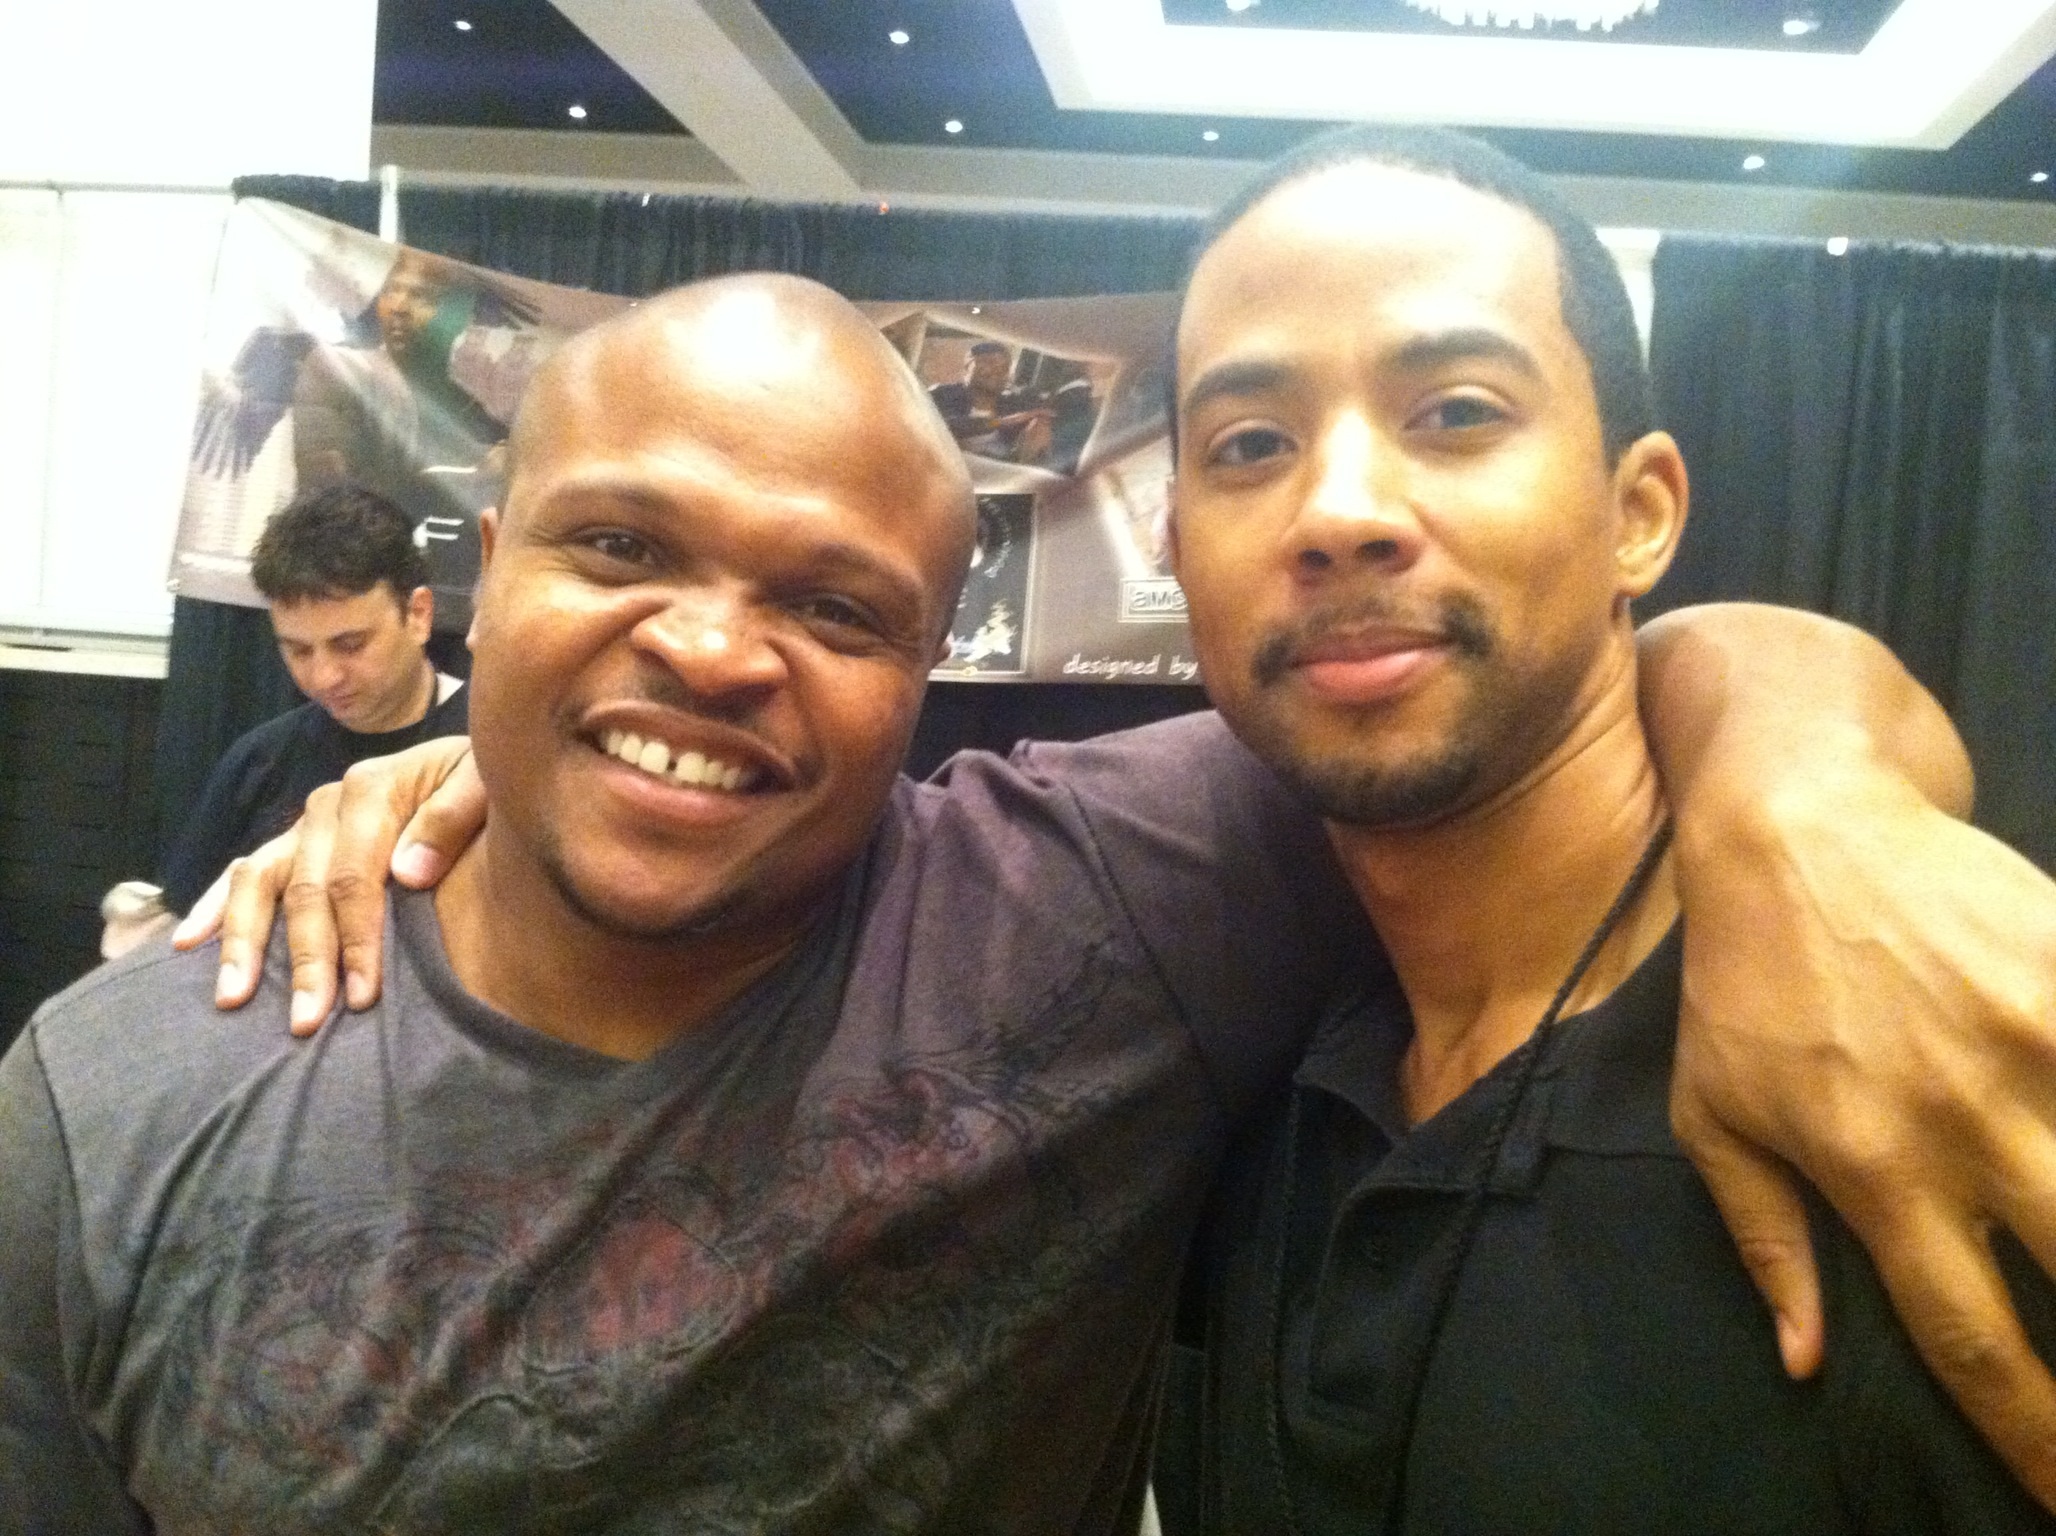 Chris Greene with IronE Singleton at the 2012 Freakshow Horror Film Festival, hosted by Spooky Empire!